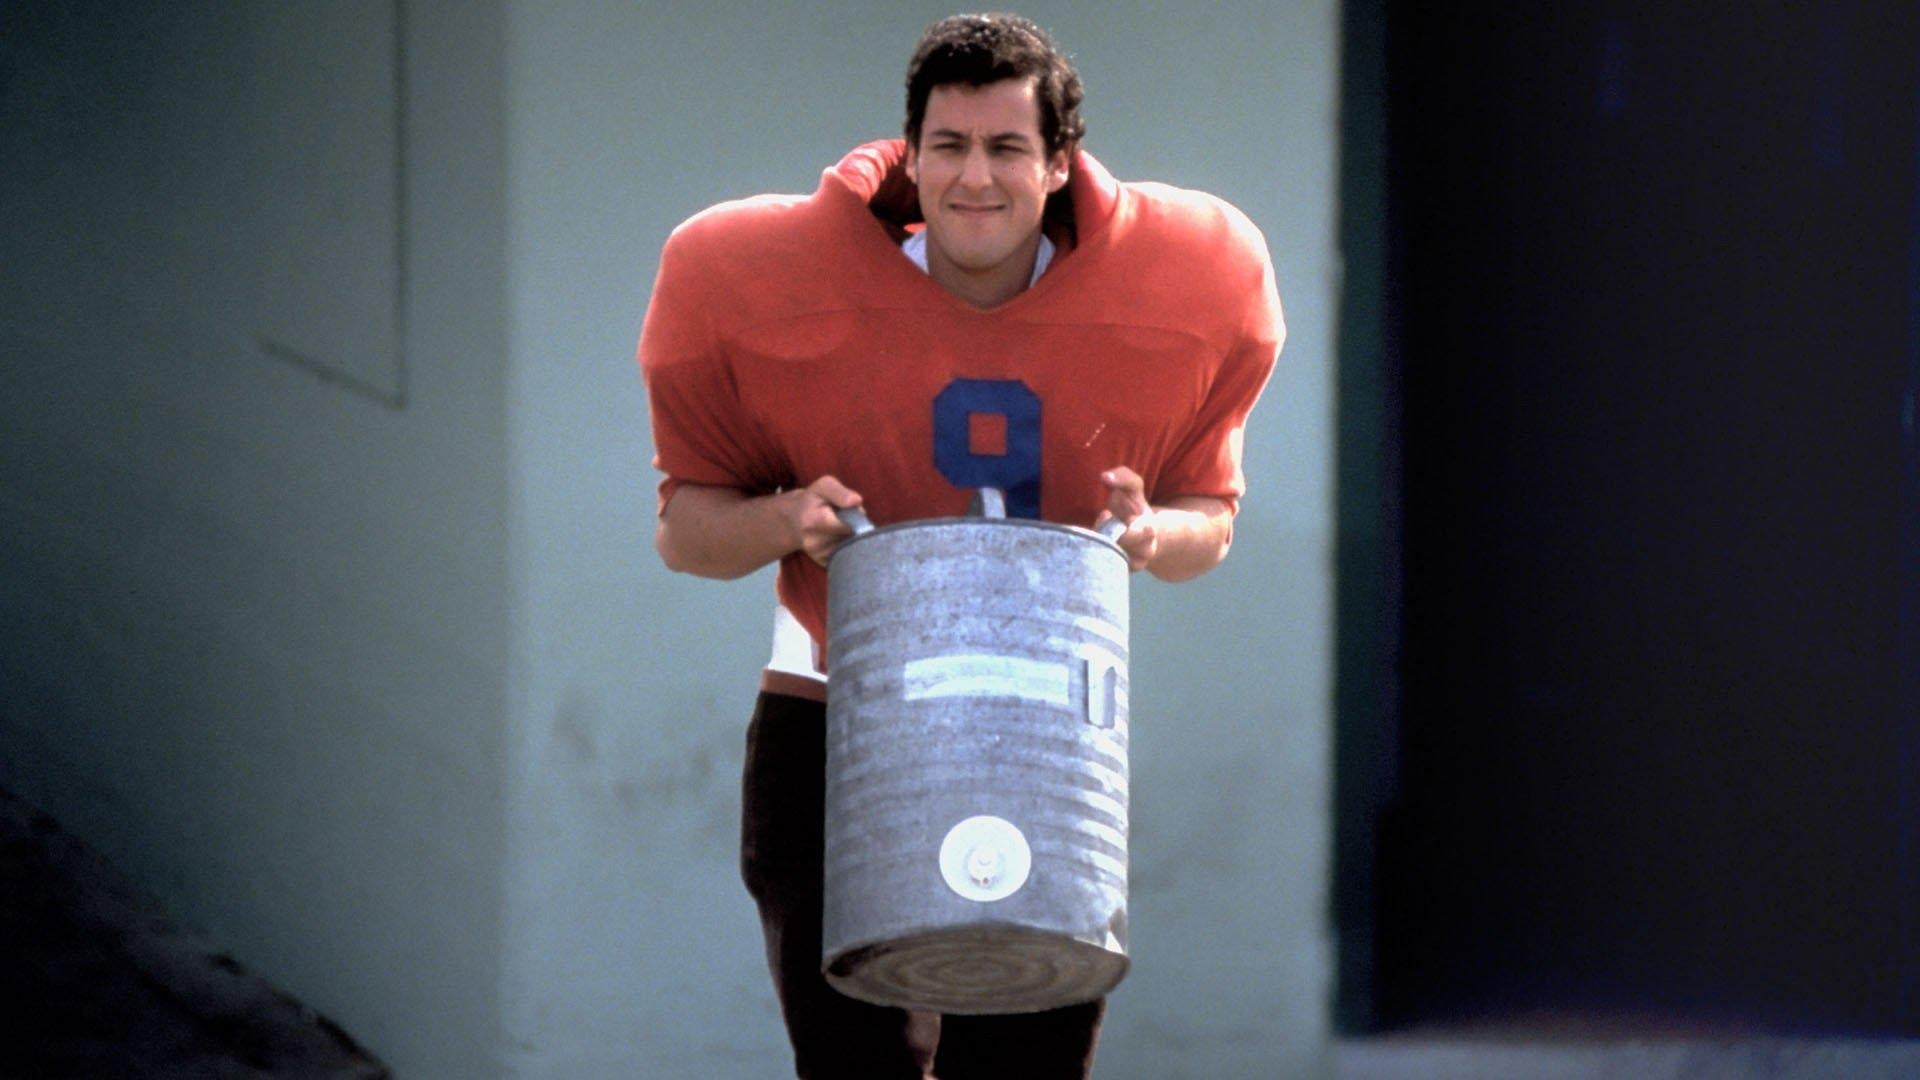 The Waterboy 1998 123movies